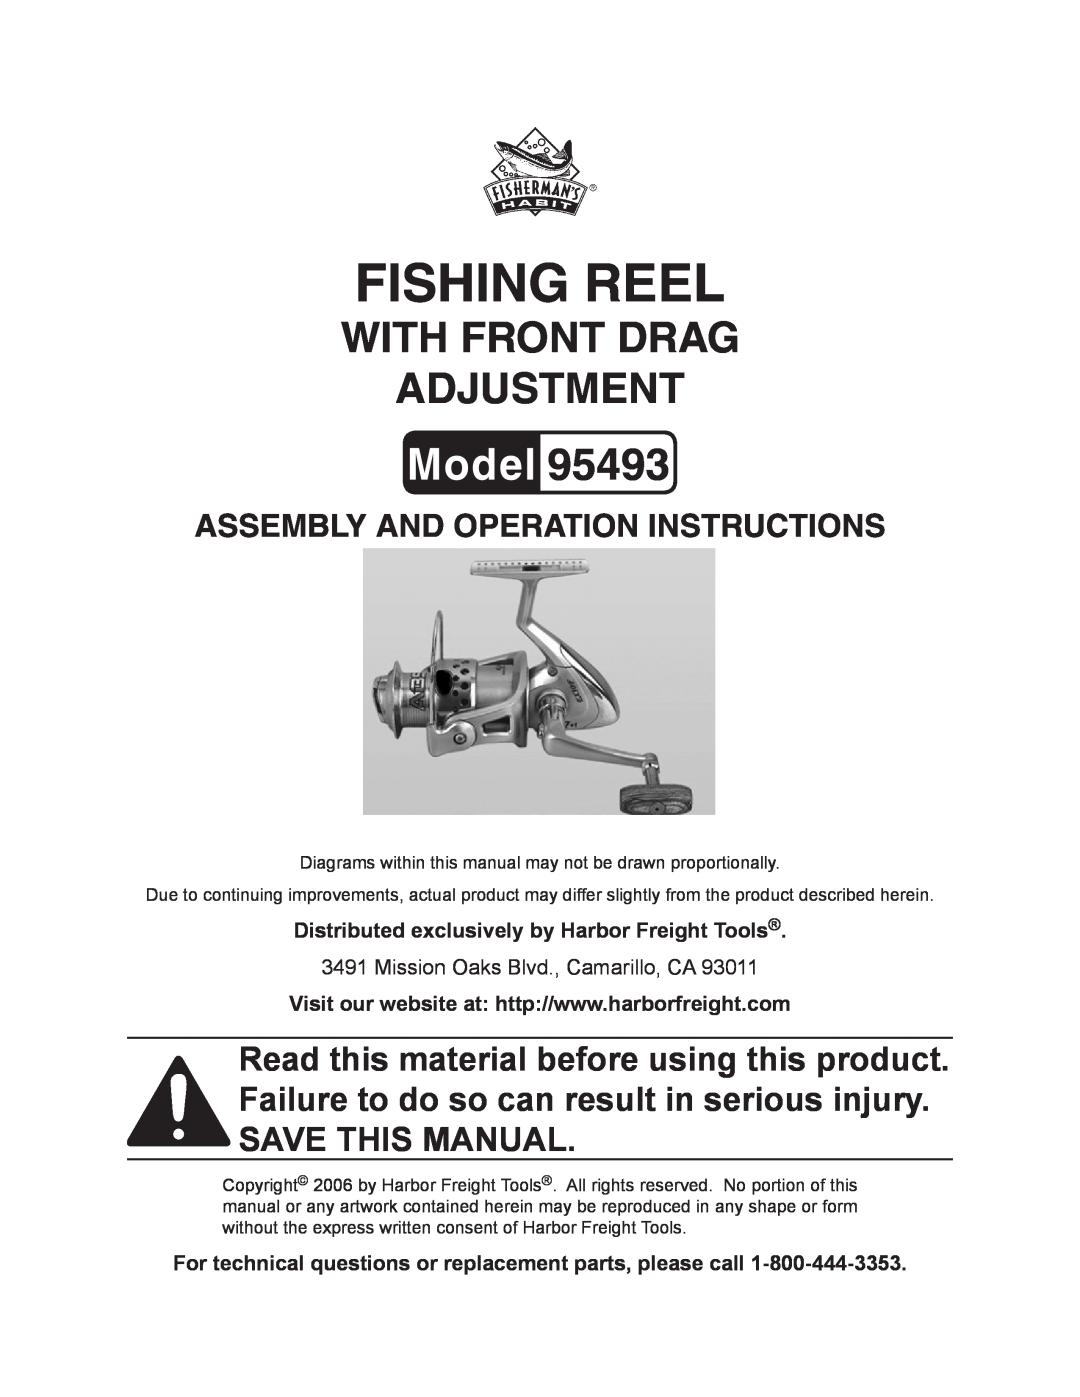 Harbor Freight Tools 95493 manual Fishing reel, Model, with front drag adjustment, Assembly And Operation Instructions 